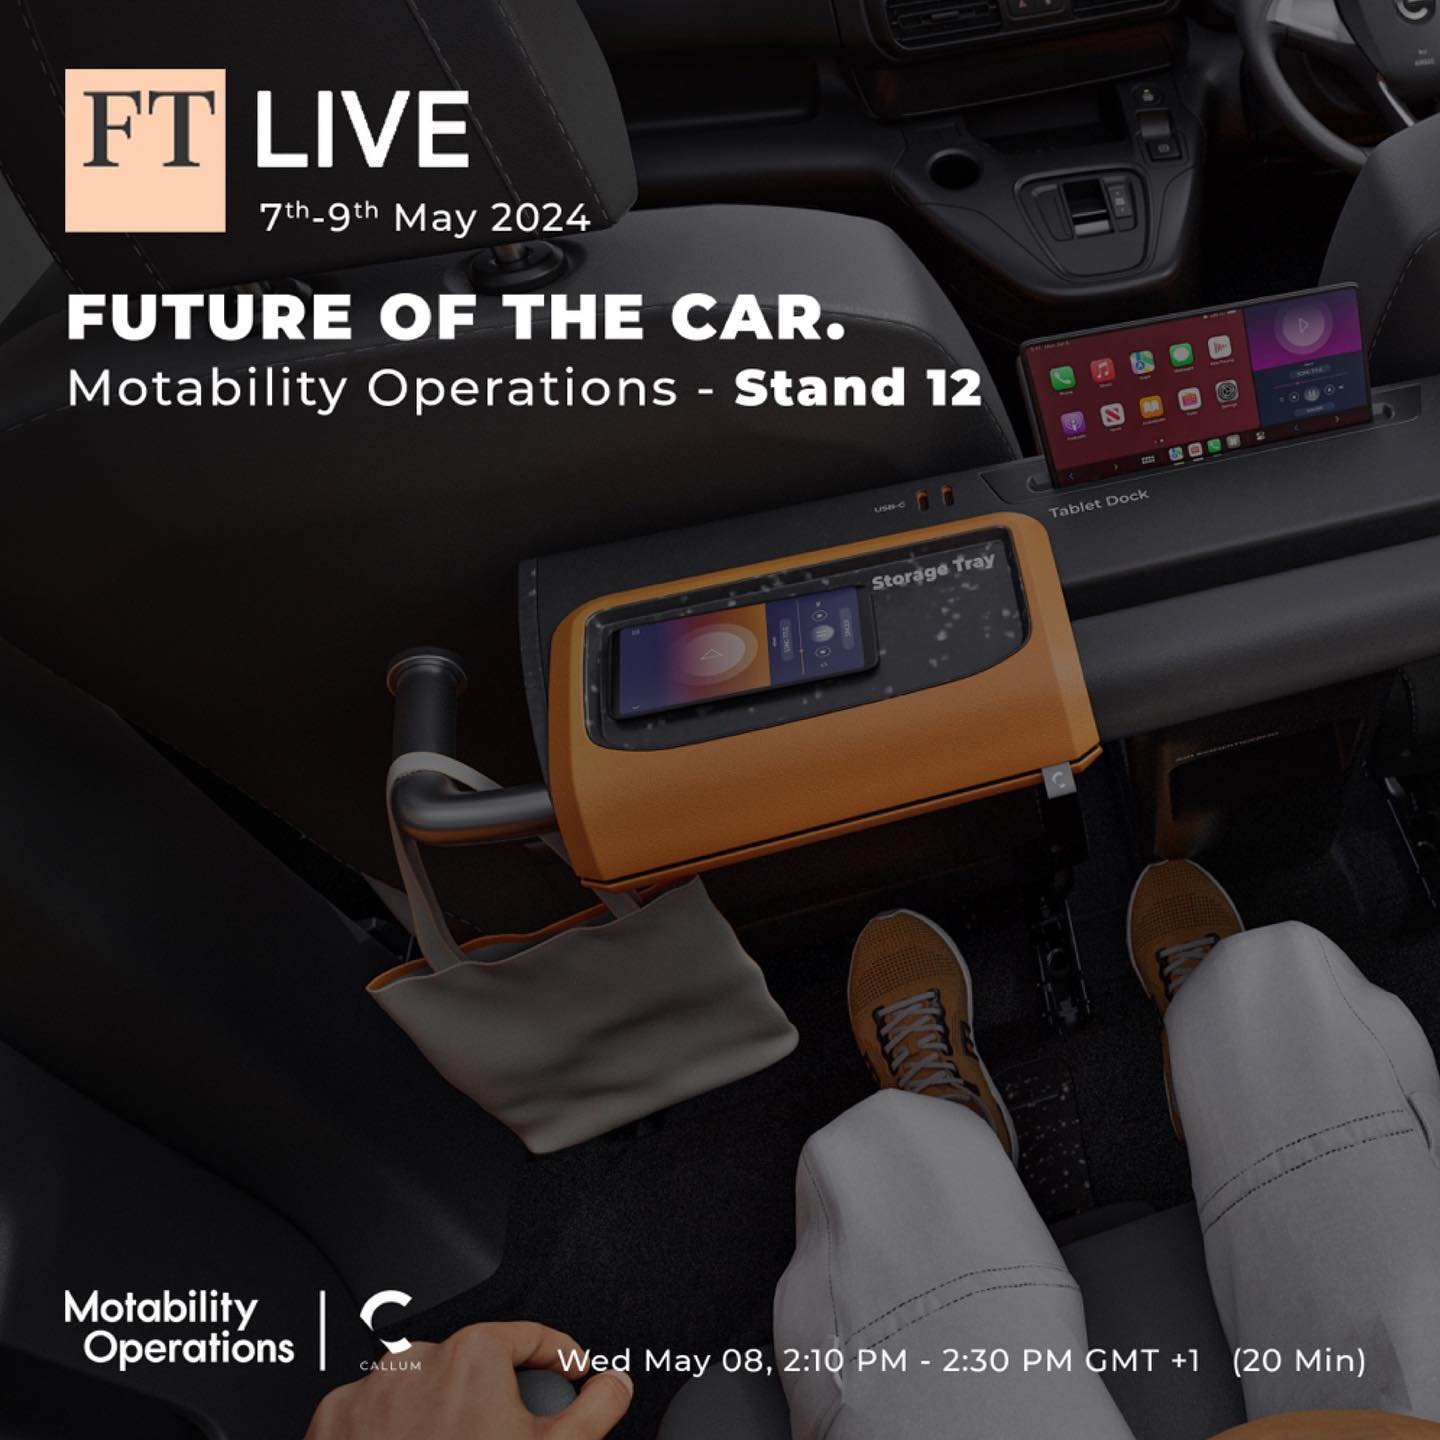 Don&rsquo;t miss our fireside chat if you&rsquo;re at the FT Future of the Car event!

Wednesday 8 May, 2.10pm, conference room 2. 

Ian Callum, Design Director at CALLUM, Andrew Miller, CEO of Mobility Operations, and Phillip Georgiadis, Transport C